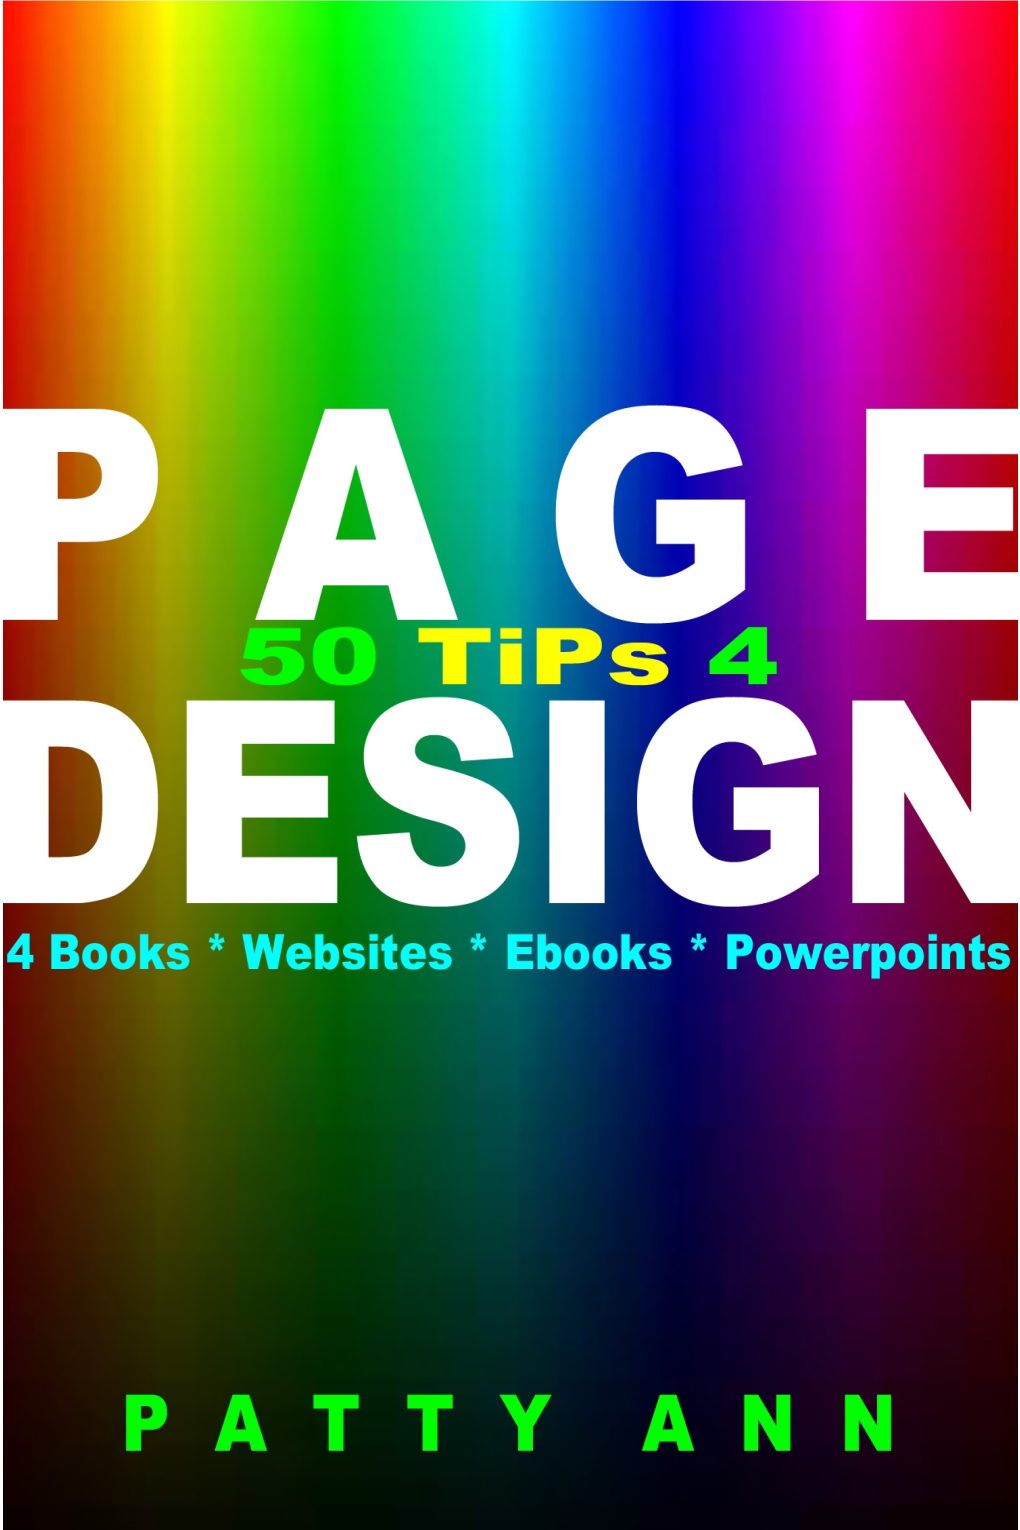 Page 1 50 Tips 4 Page Design All Rights Reserved © Pattyann.Net 50 Tips 4 Page Design